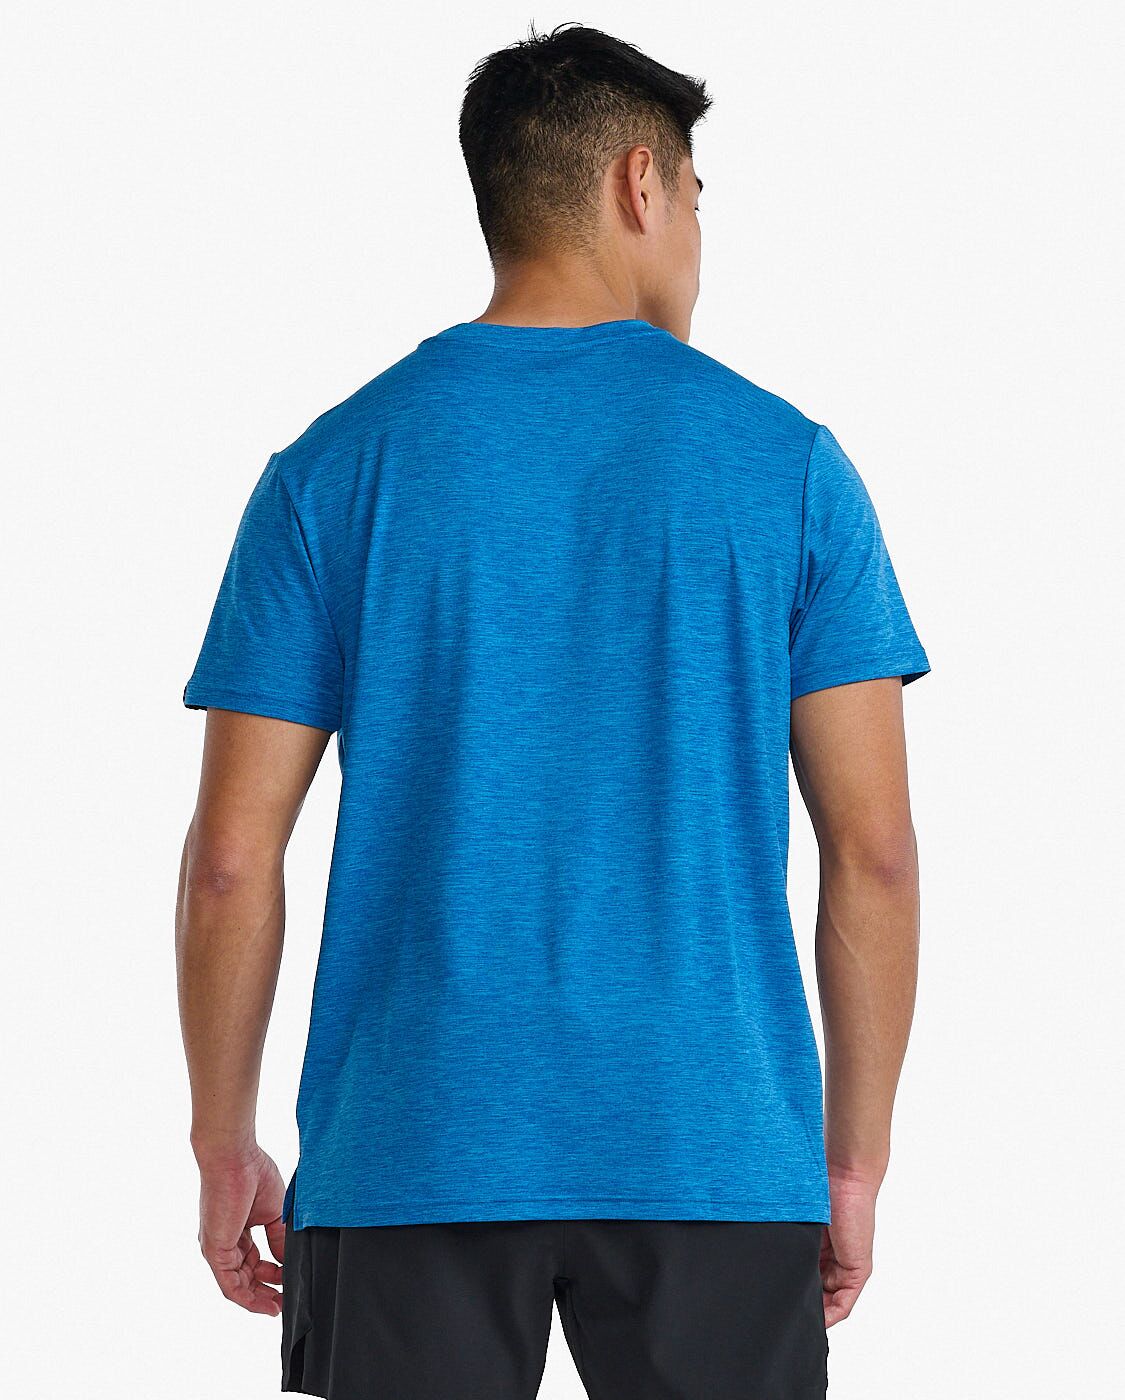 2XU South Africa - Mens Motion Graphic Tee - ETK/MDN